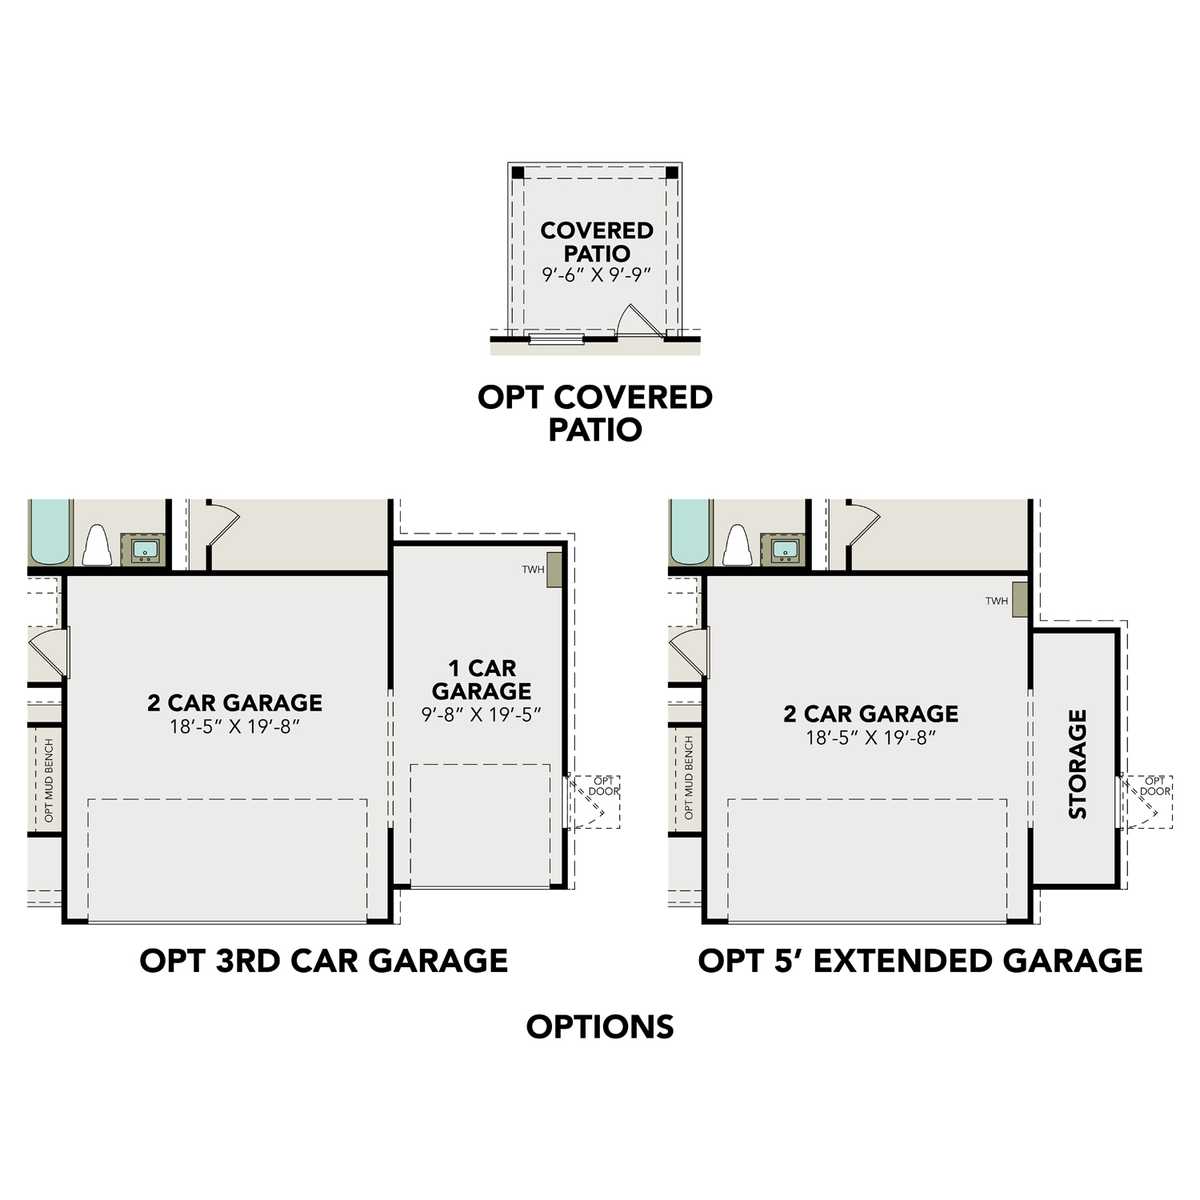 2 - The Frio G buildable floor plan layout in Davidson Homes' Caney Creek Place community.